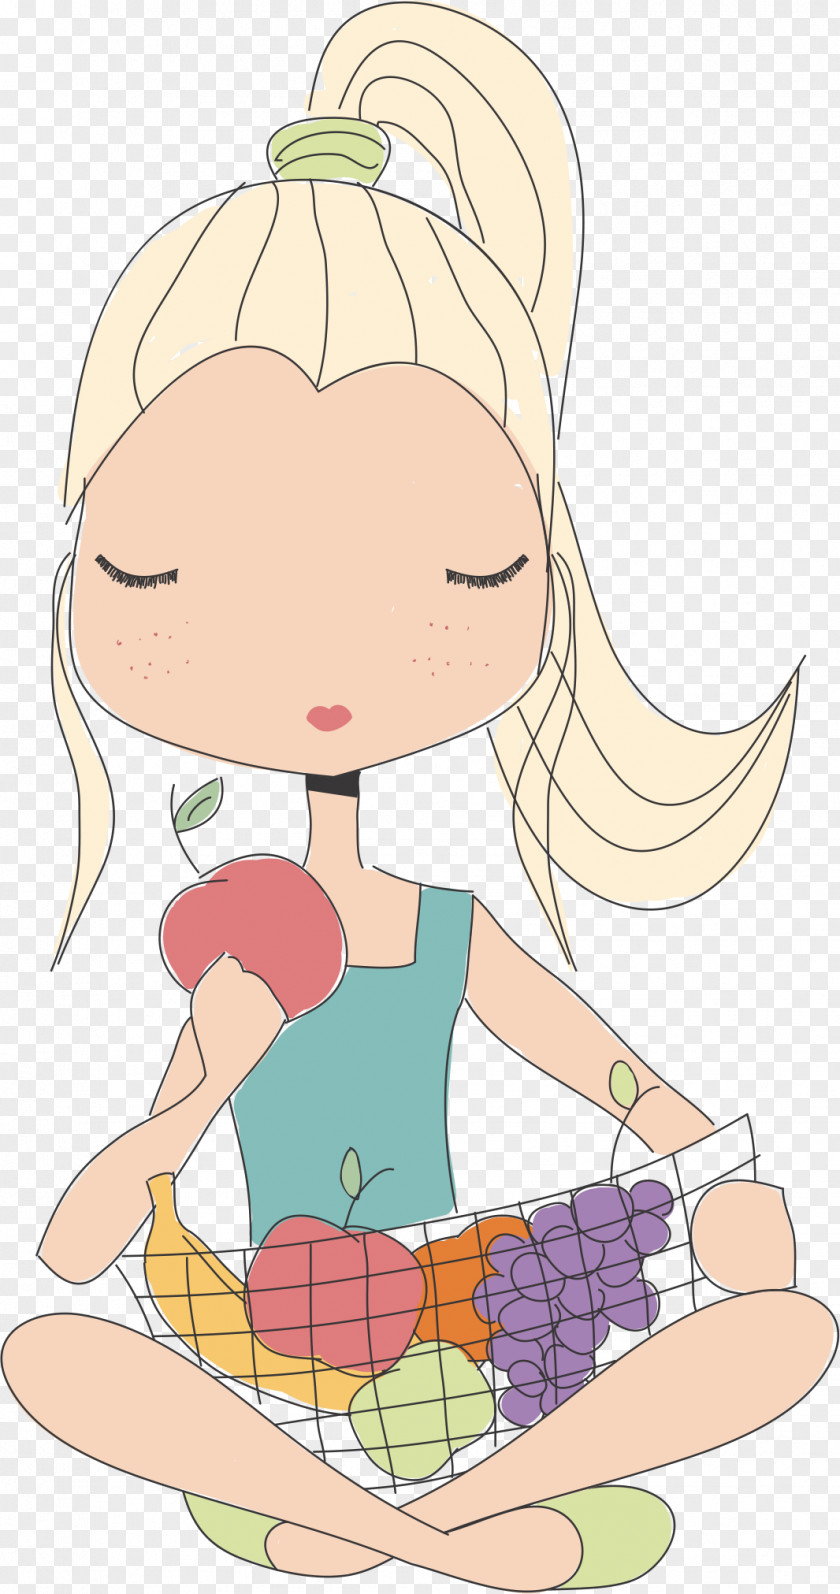 Cartoon Child Health Eating Food Healthy Diet Illustration PNG